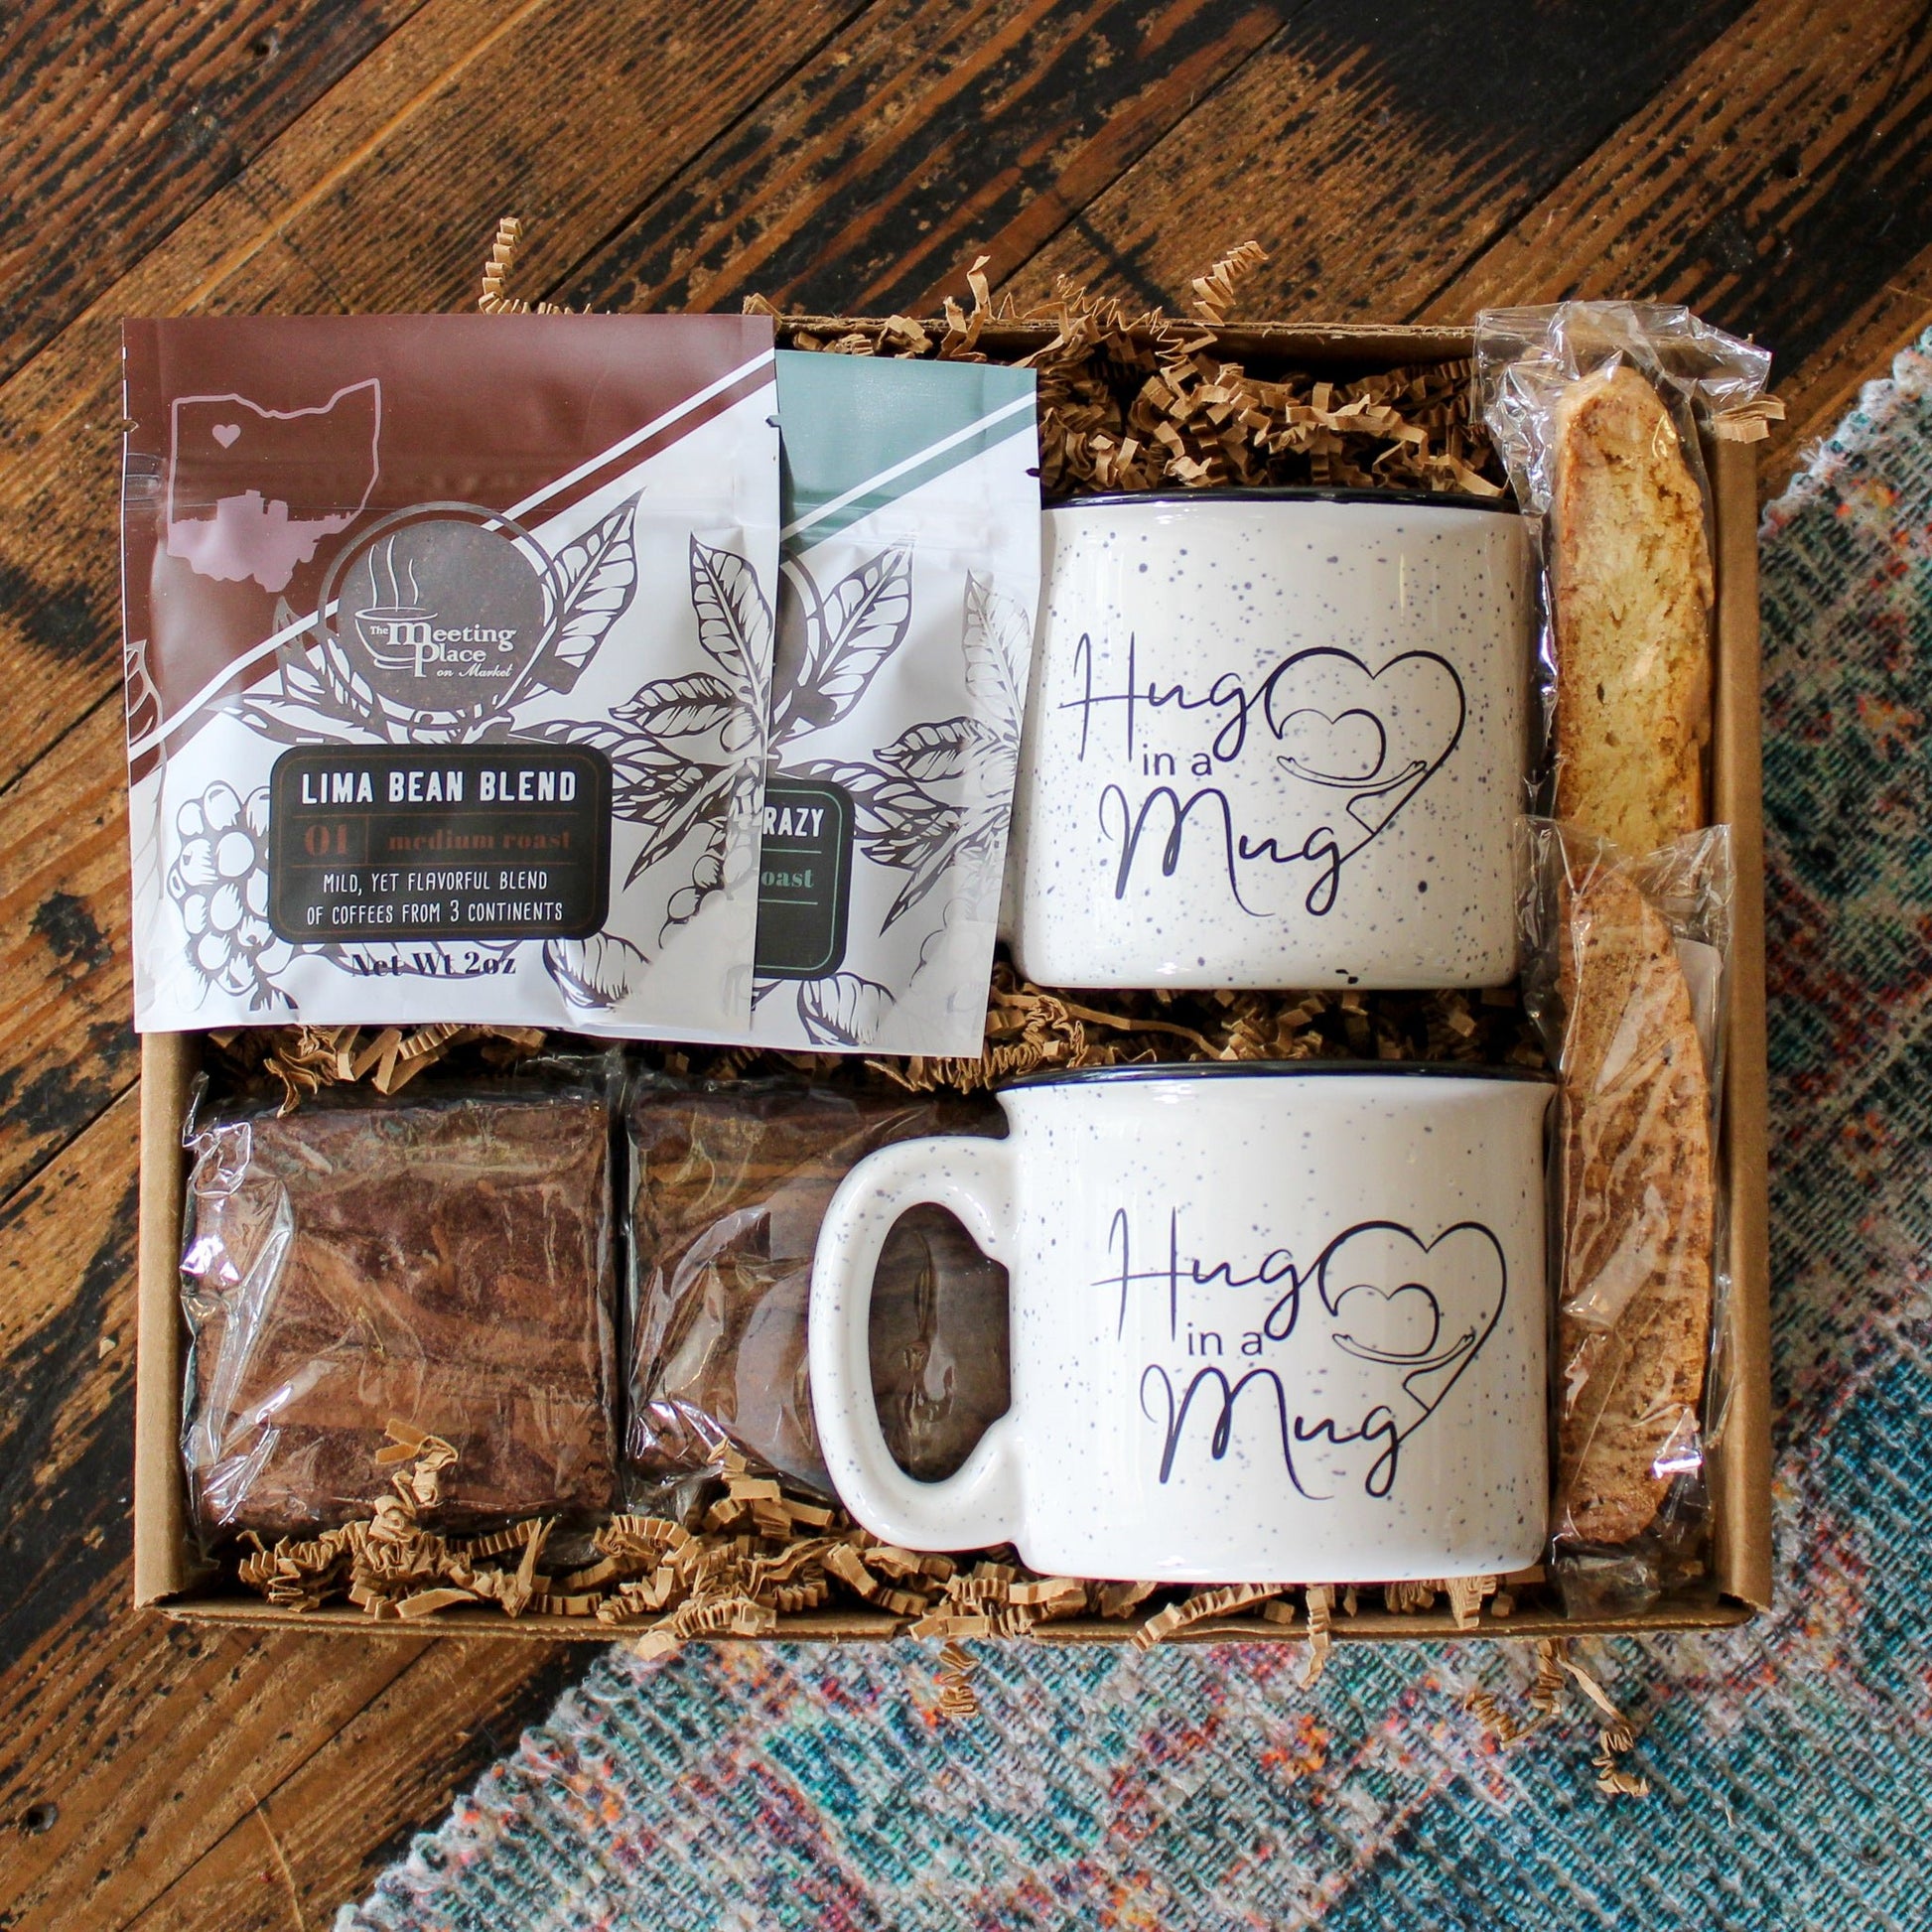 Hug in a Mug Gift Box for Two Congratulations - The Meeting Place on Market